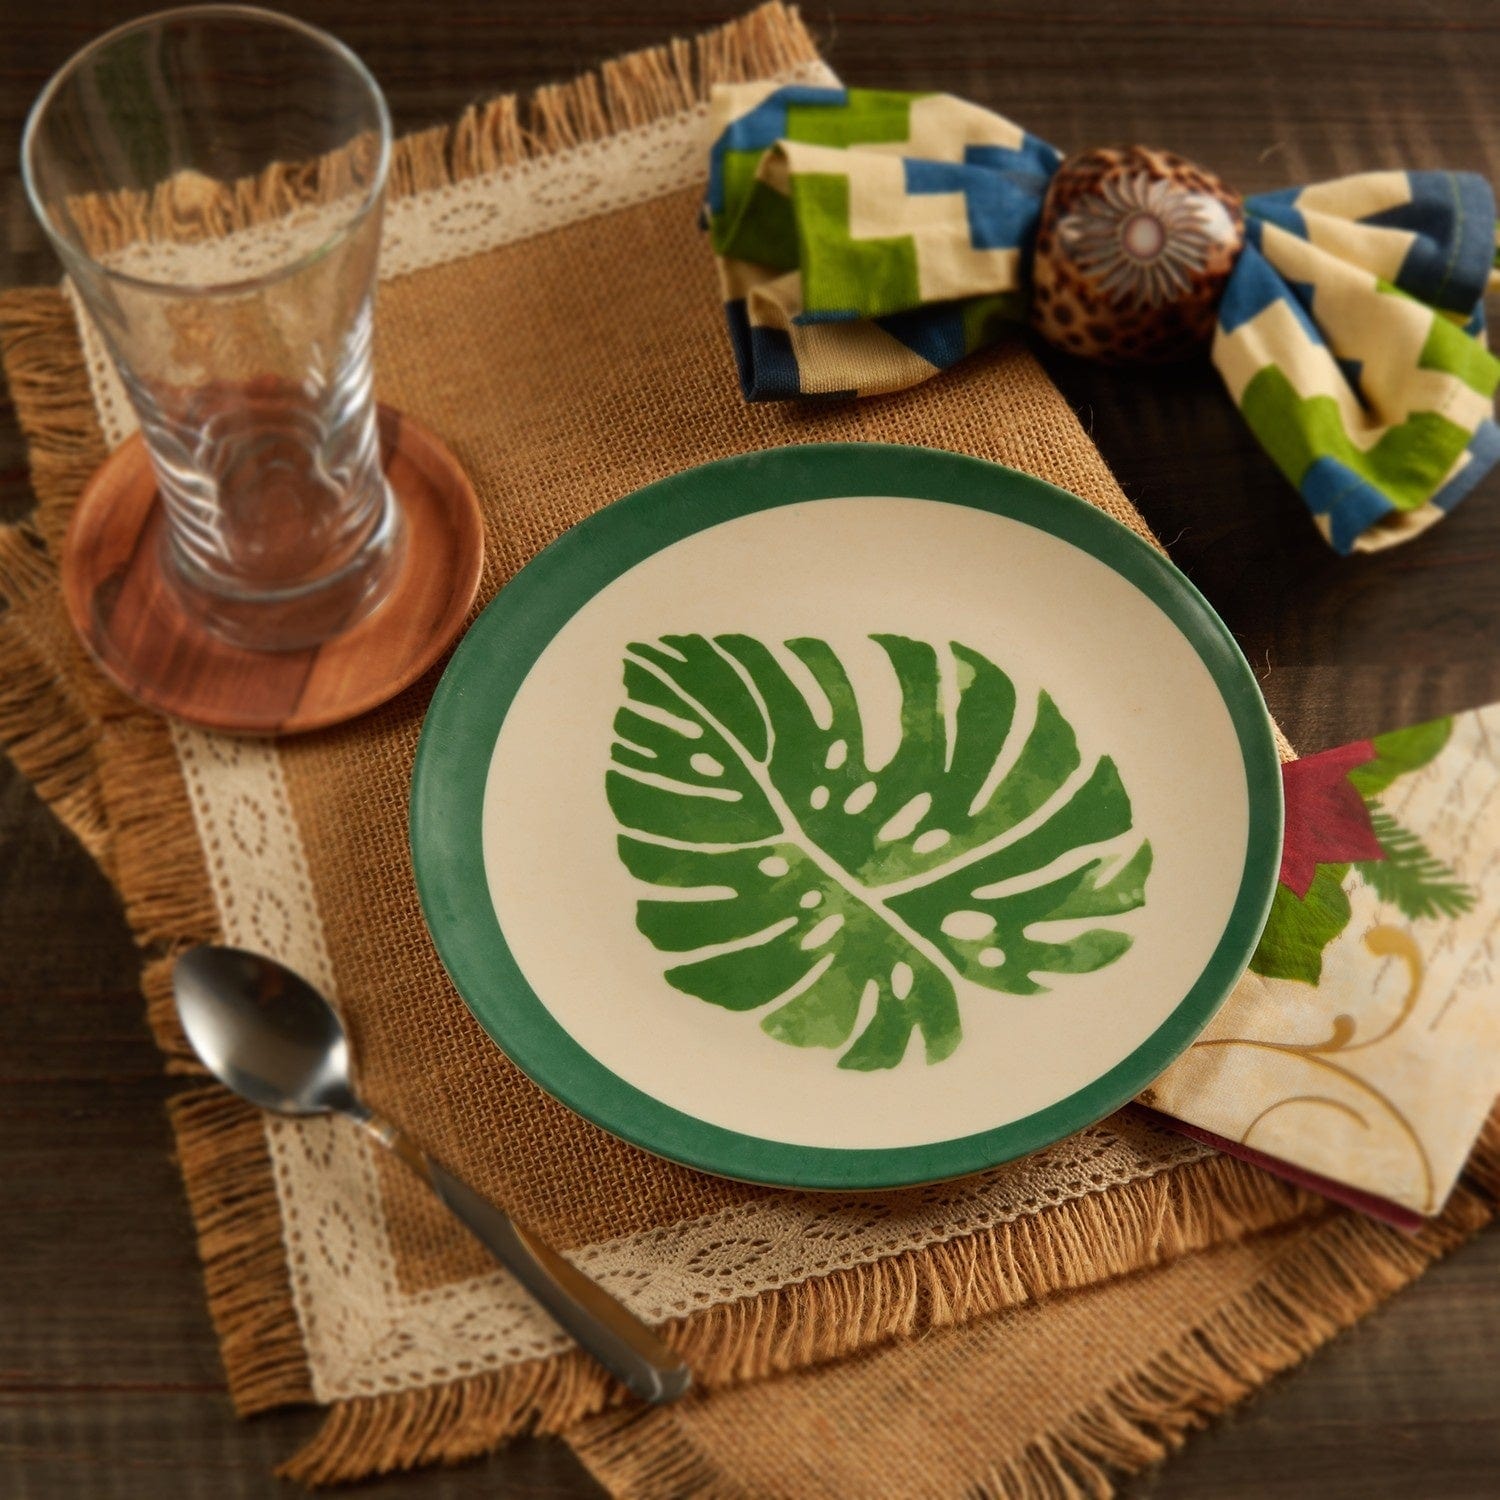 Red Butler Half Plates Bamboo Fibre Plate 8 inches | 6pcs Set | Leaf Design BP08A3 Daily-Use Eco-Friendly Bamboo Fiber Snack Plate: Stylish & Sustainable Redbutler